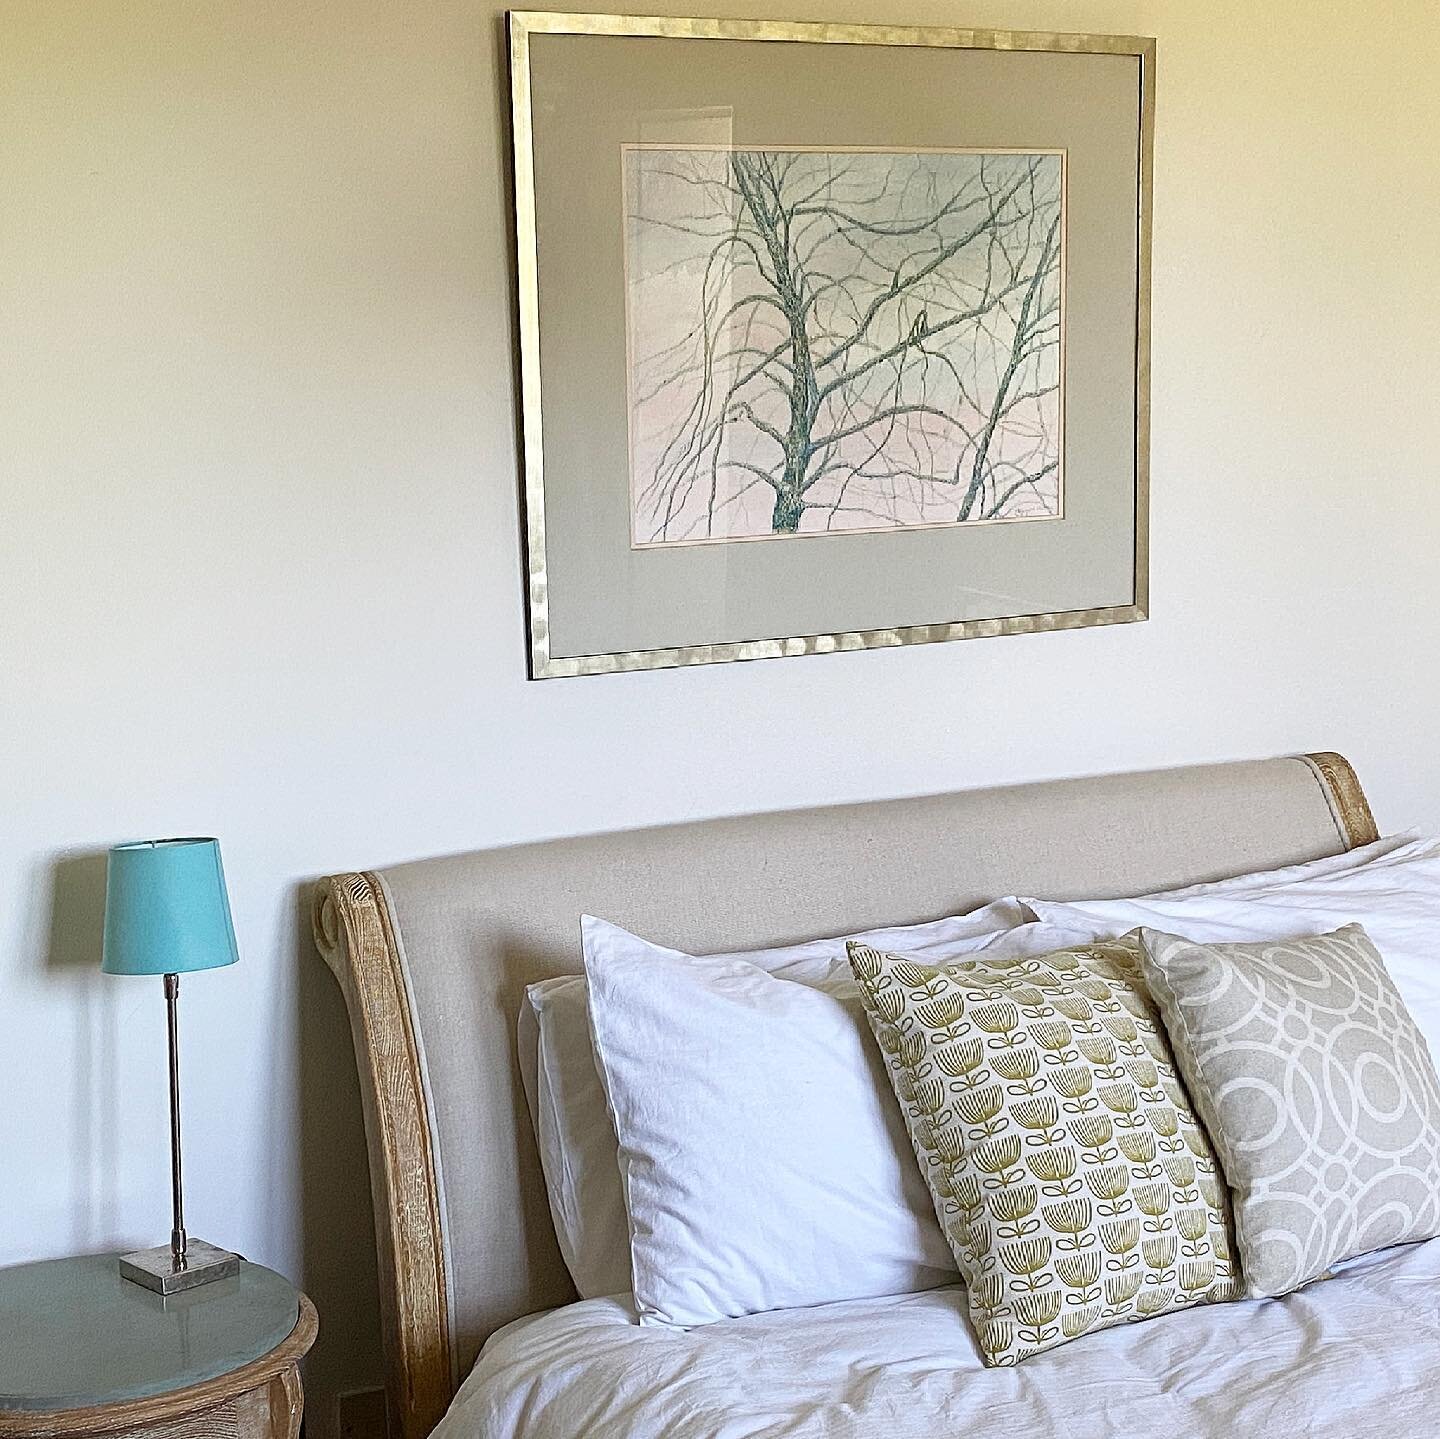 SATURDAY IN SITU. &ldquo;Tree Net 1&rdquo;, watercolour. The owner has found the perfect place for this early work. It lends a restful and calm presence to her daughter&rsquo;s bedroom. #saturdayinsitu #bedroomdecor #bedroom #bedroomideas #calm #rest